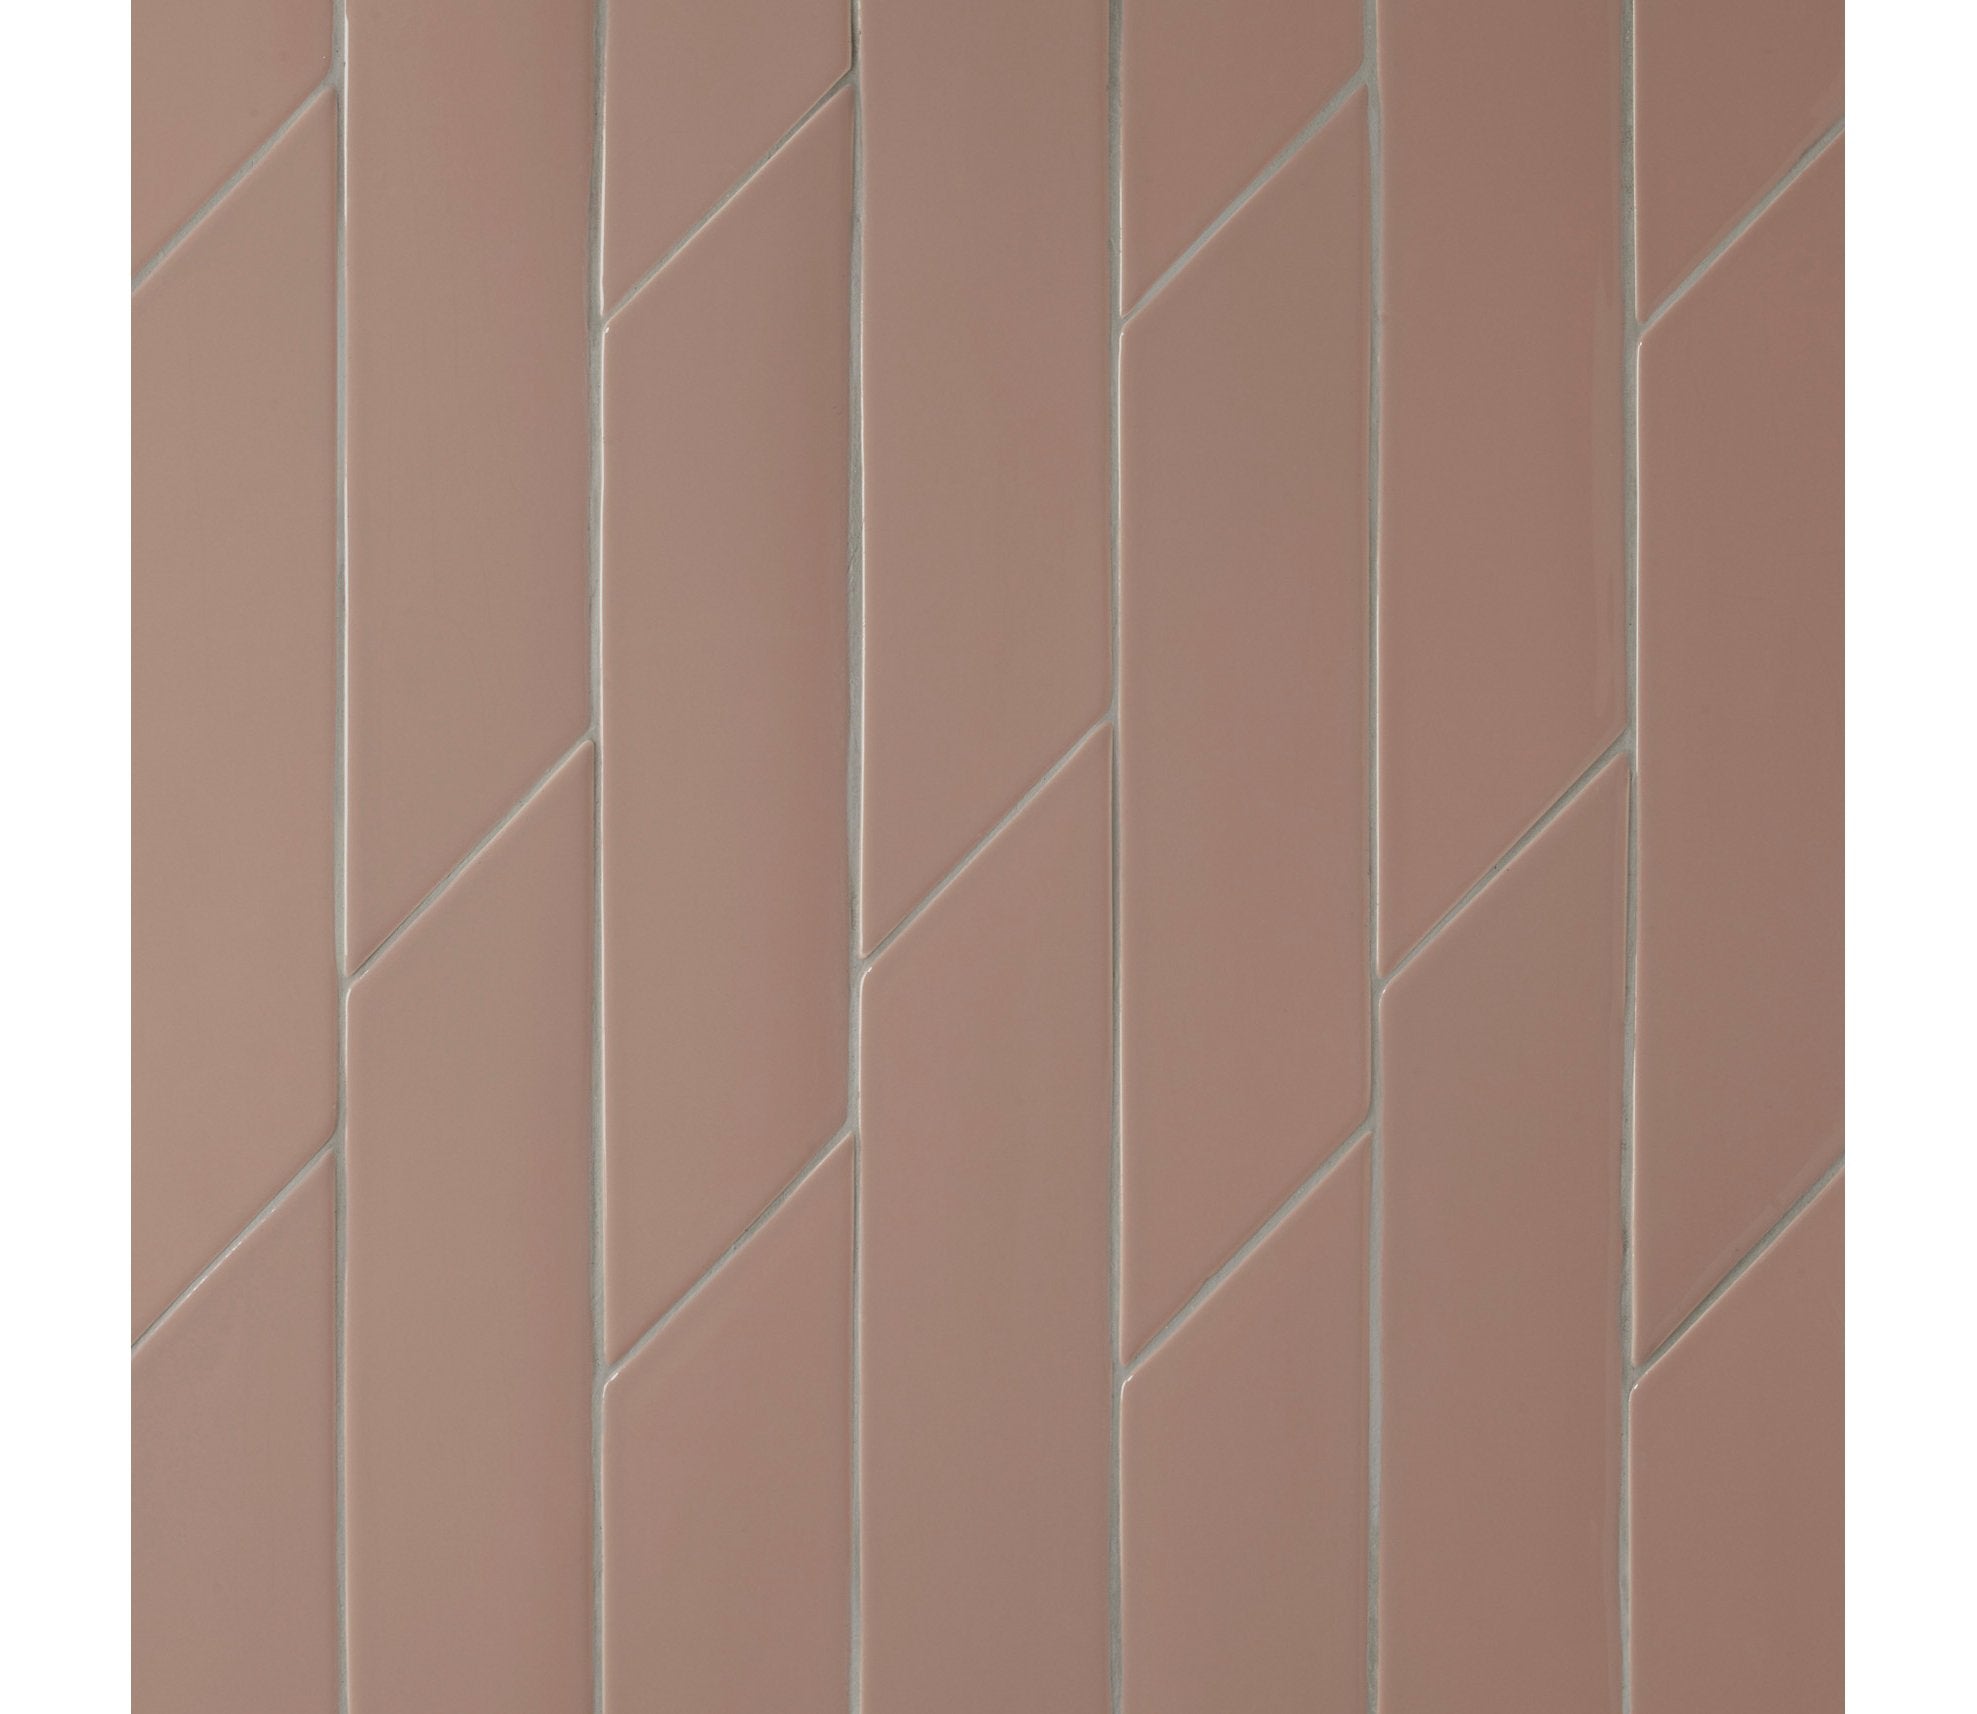 Hanley Traditional Tiles Product Image 18